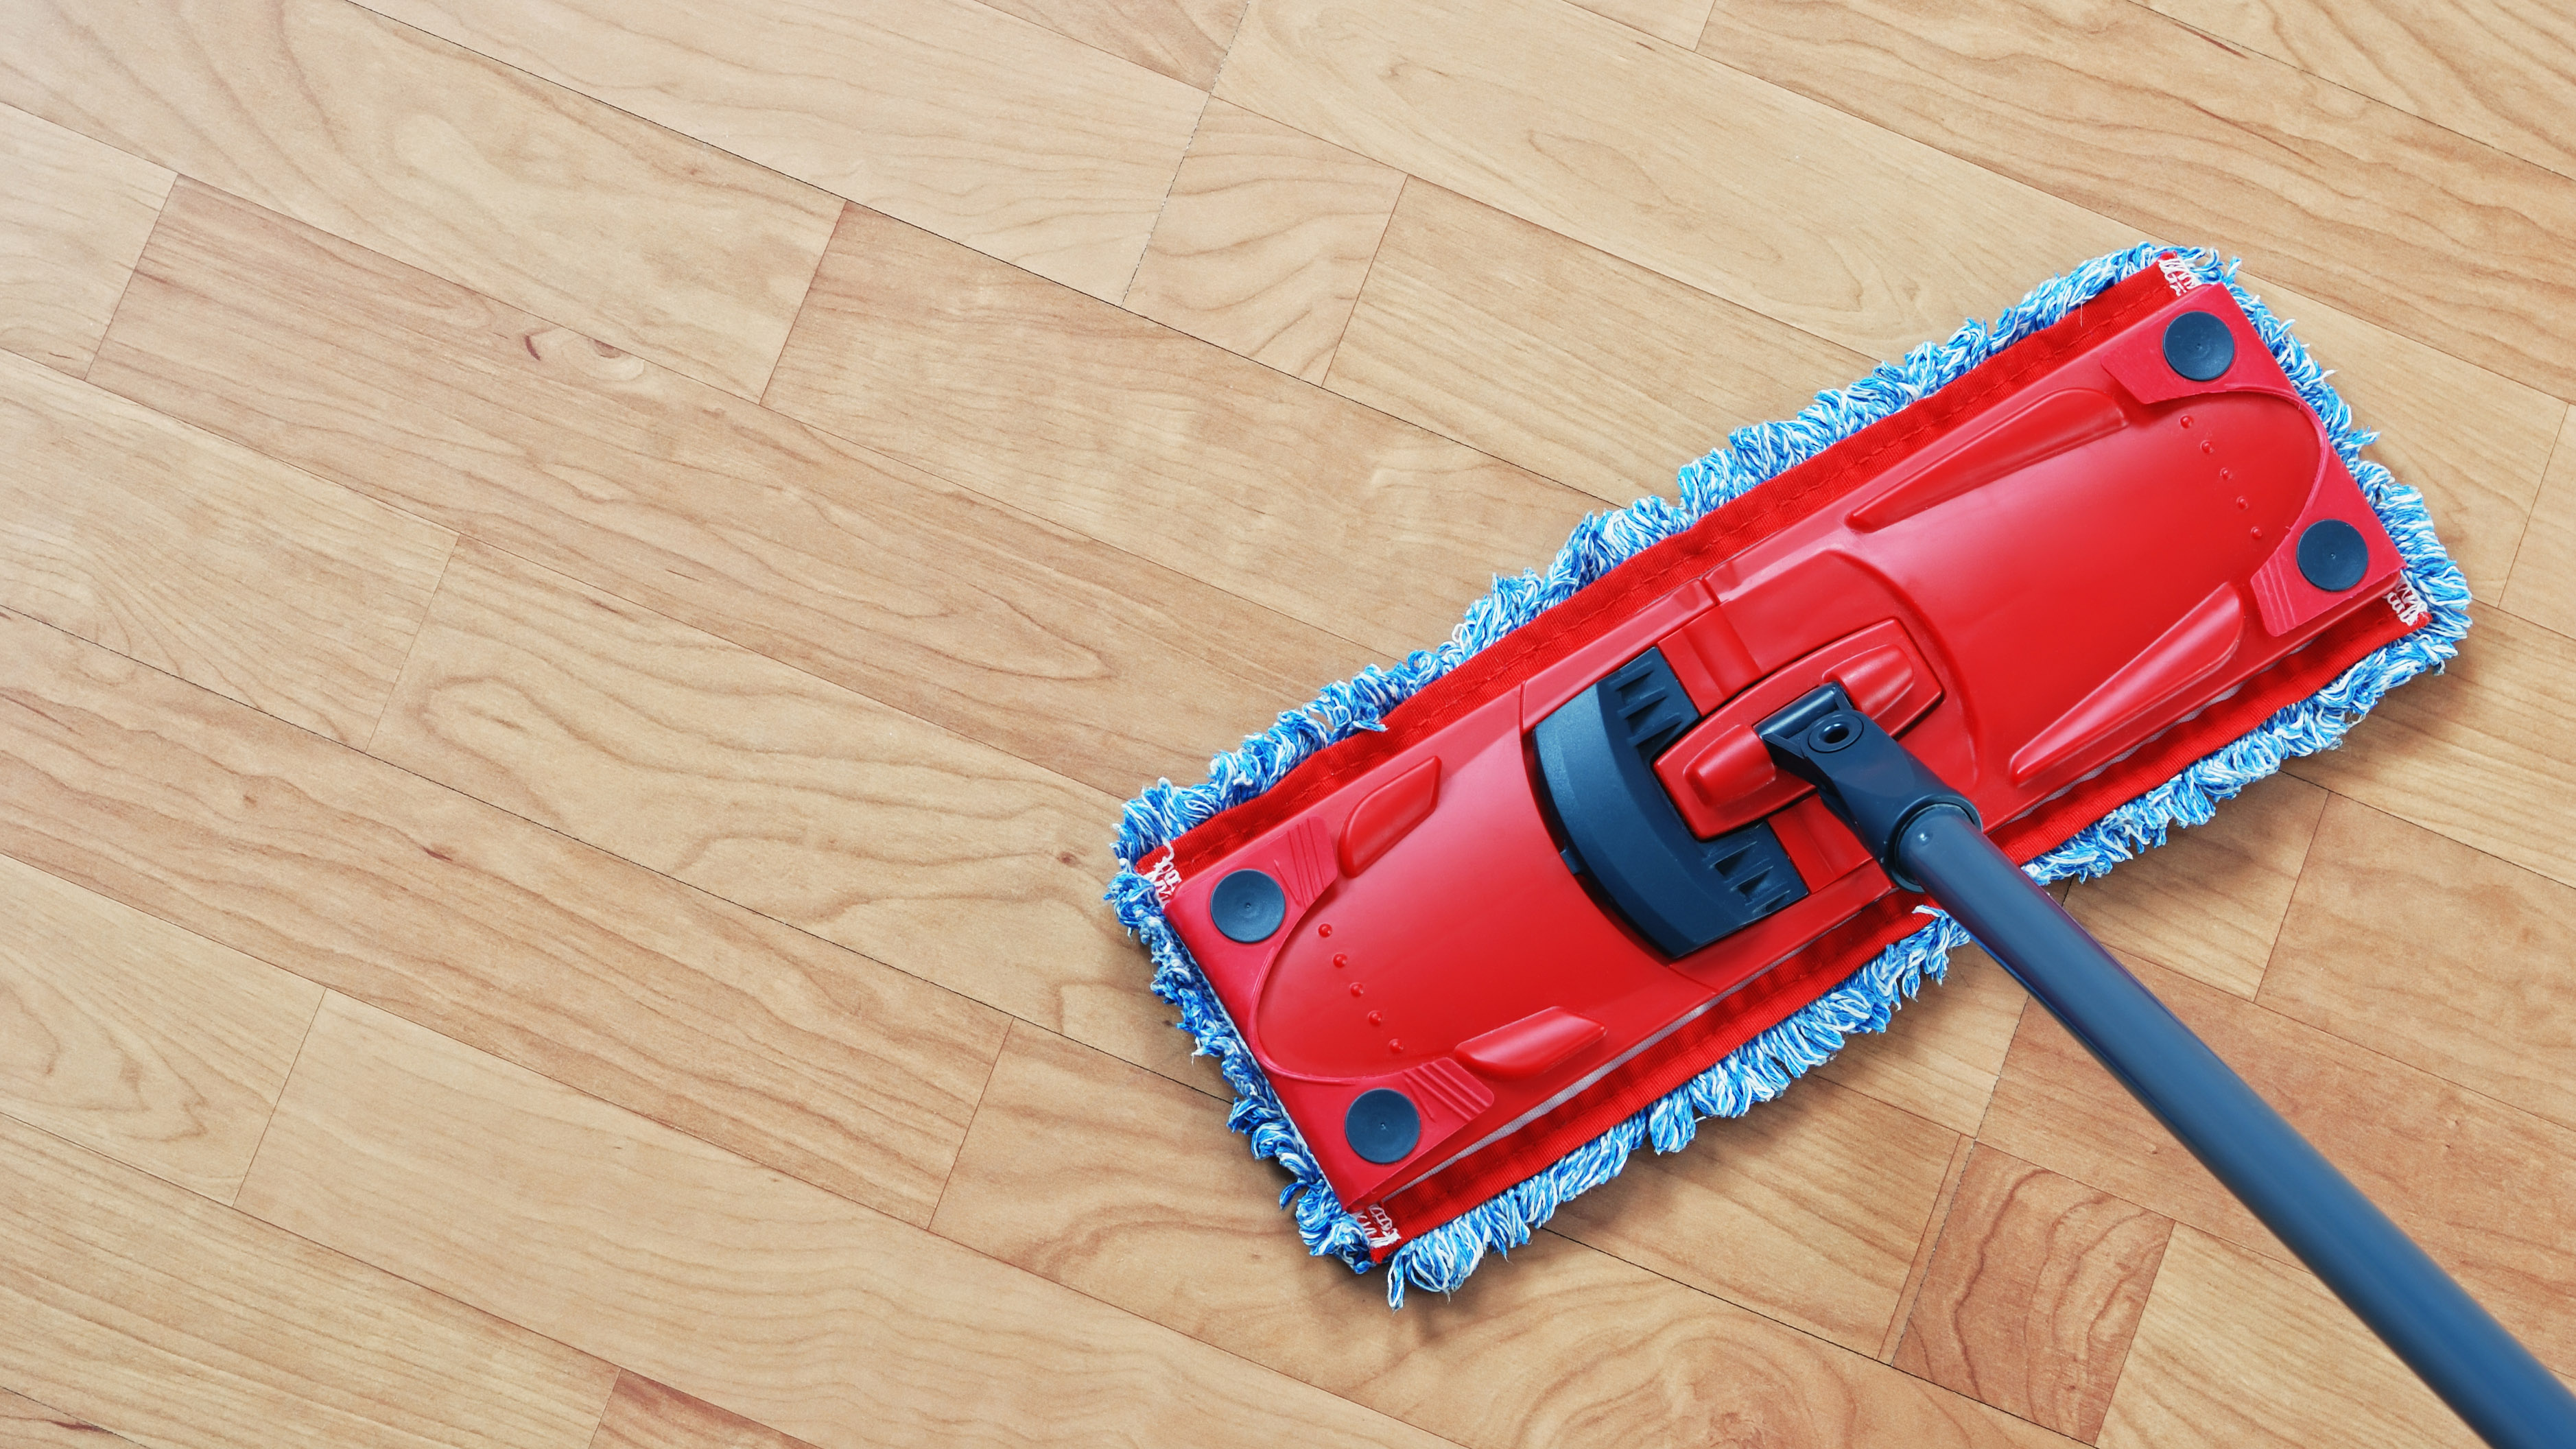 How To Clean Hardwood Floors Without, How To Keep Hardwood Floors Clean And Shiny